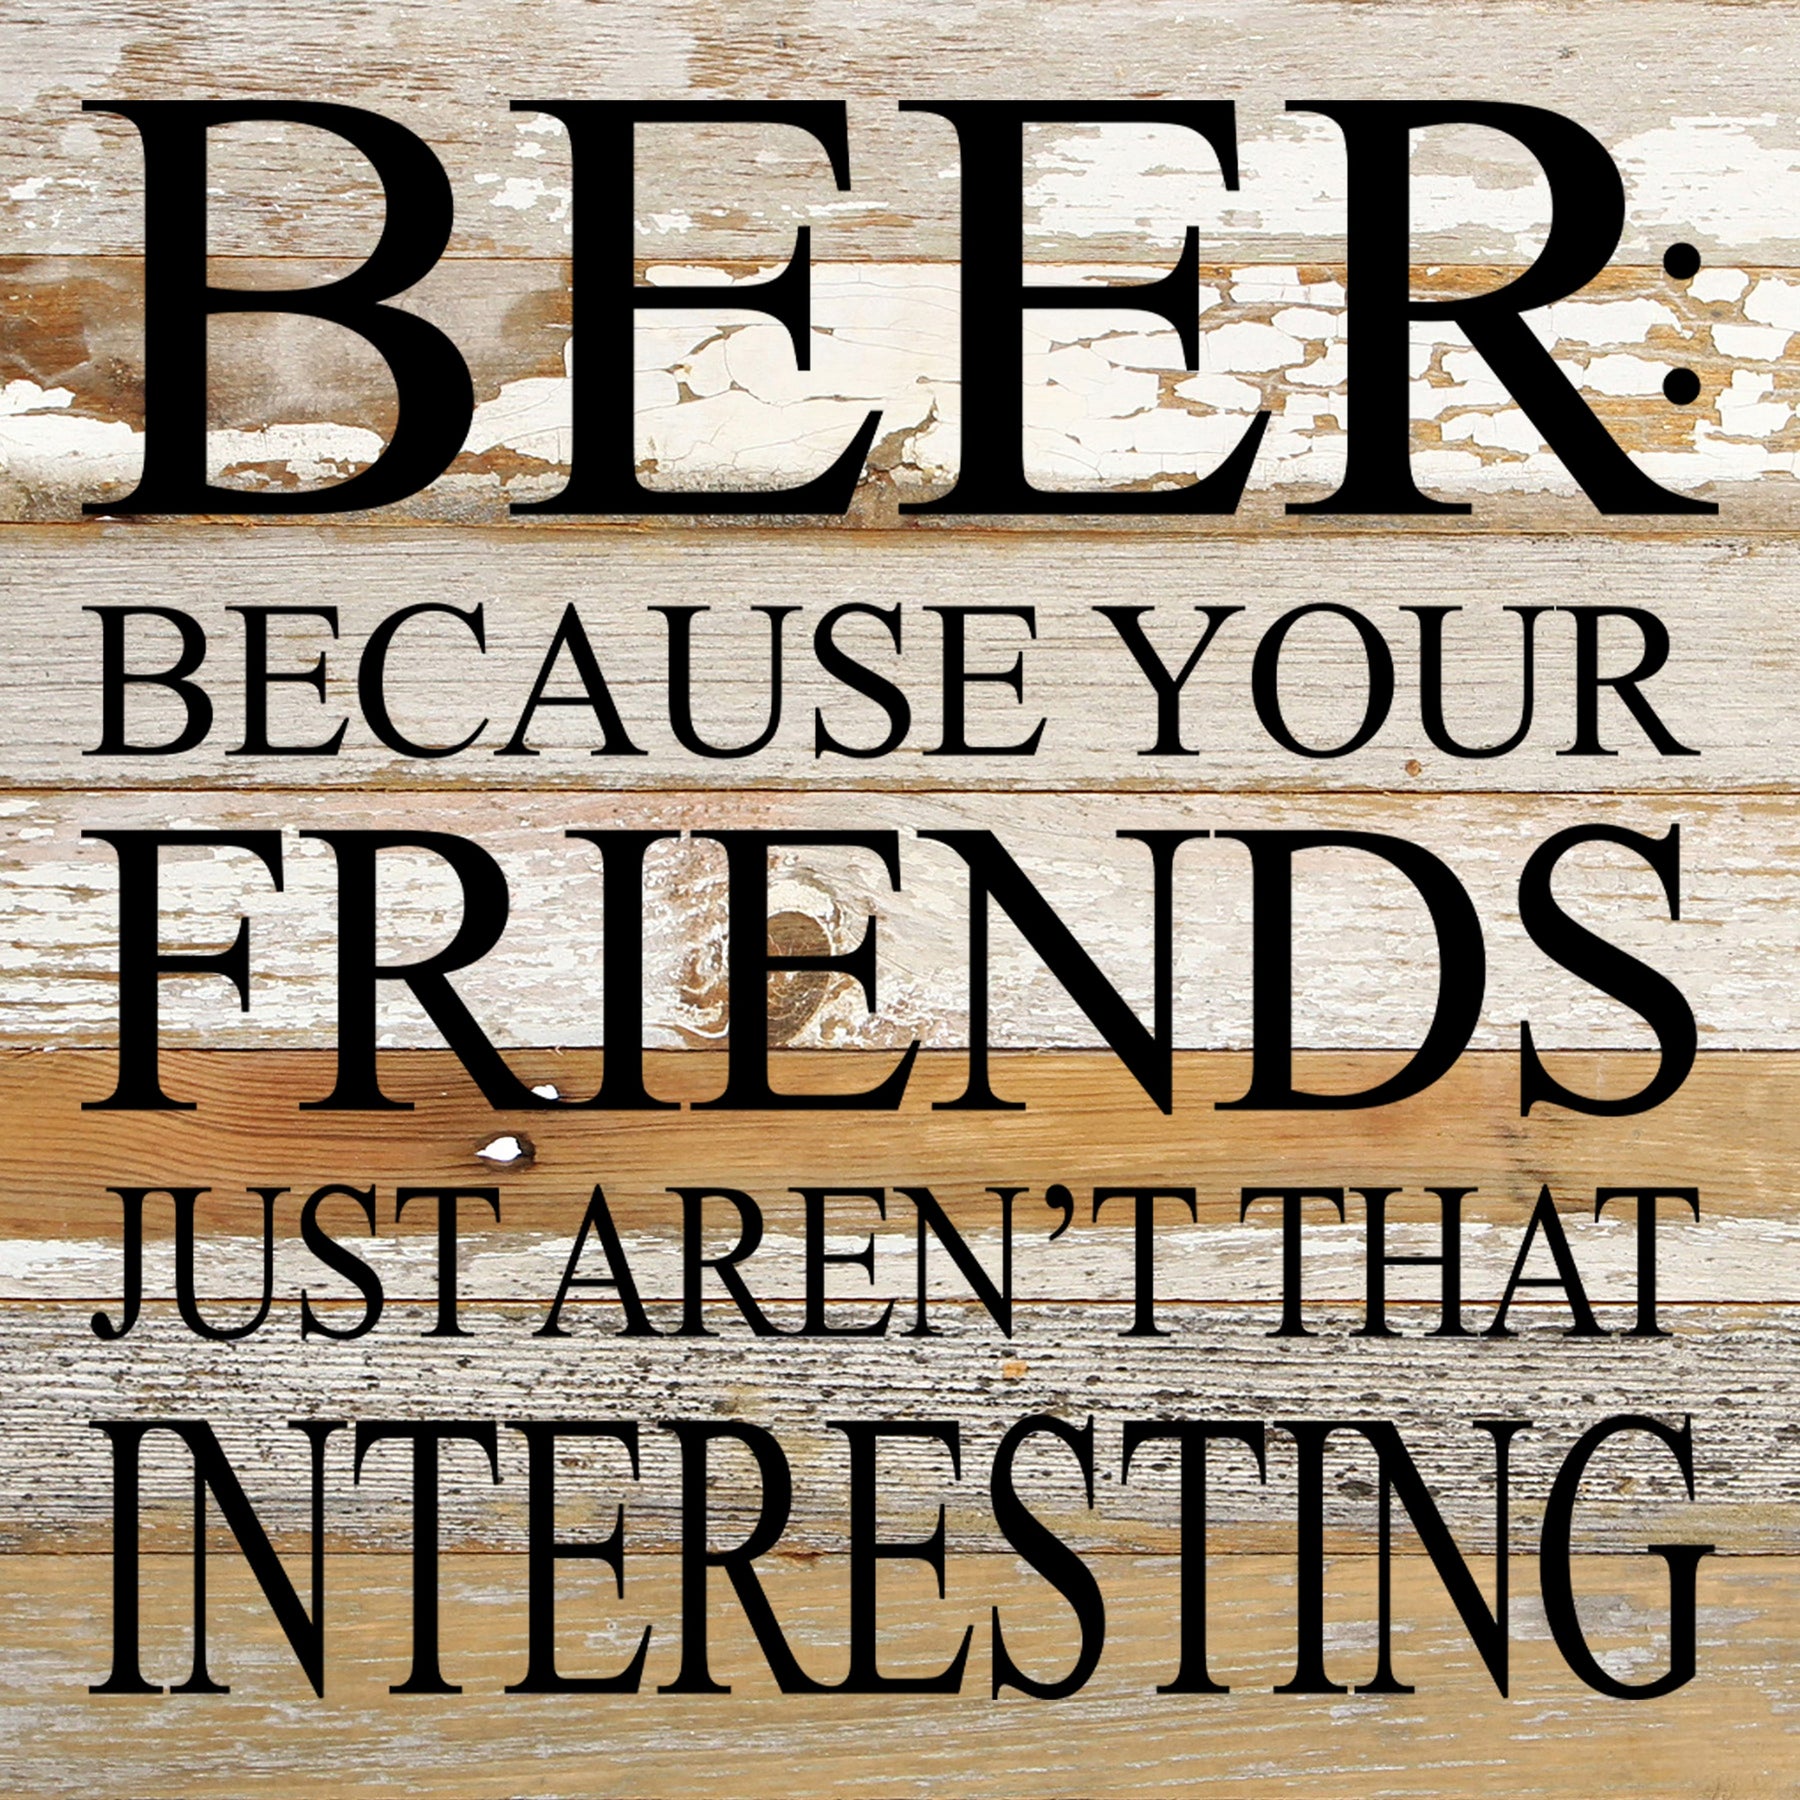 Beer: because your friends just aren't that interesting. / 10"x10" Reclaimed Wood Sign